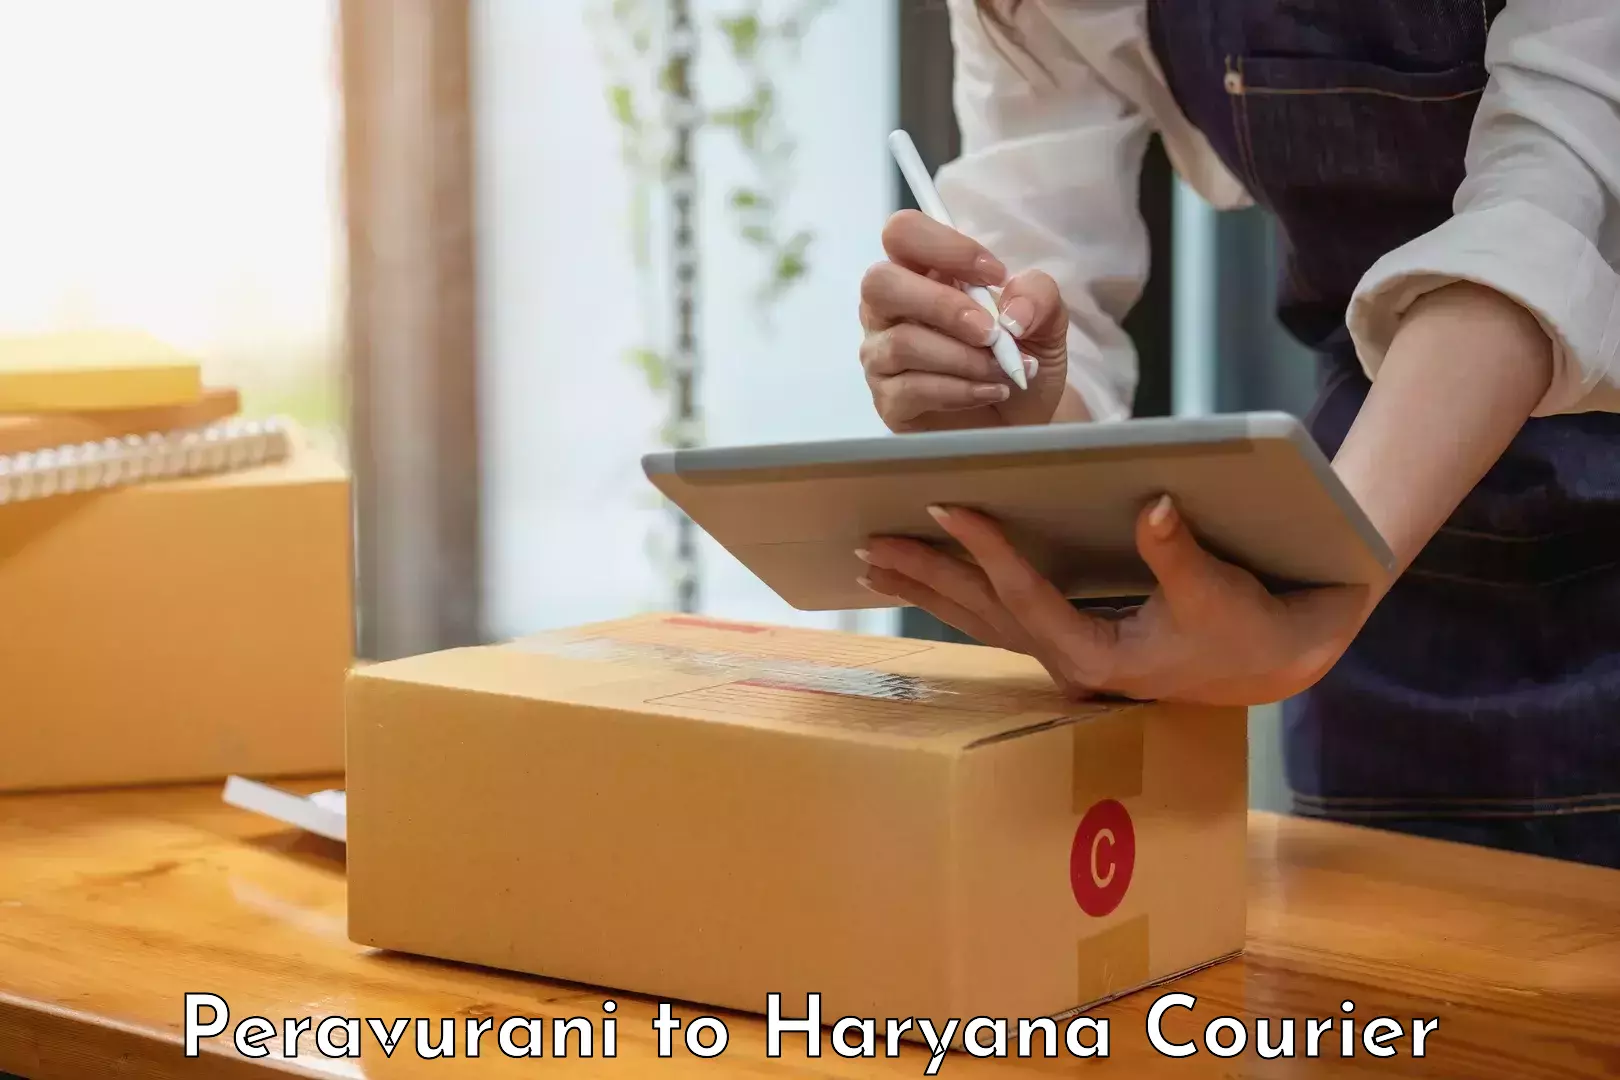 24-hour delivery options Peravurani to NCR Haryana